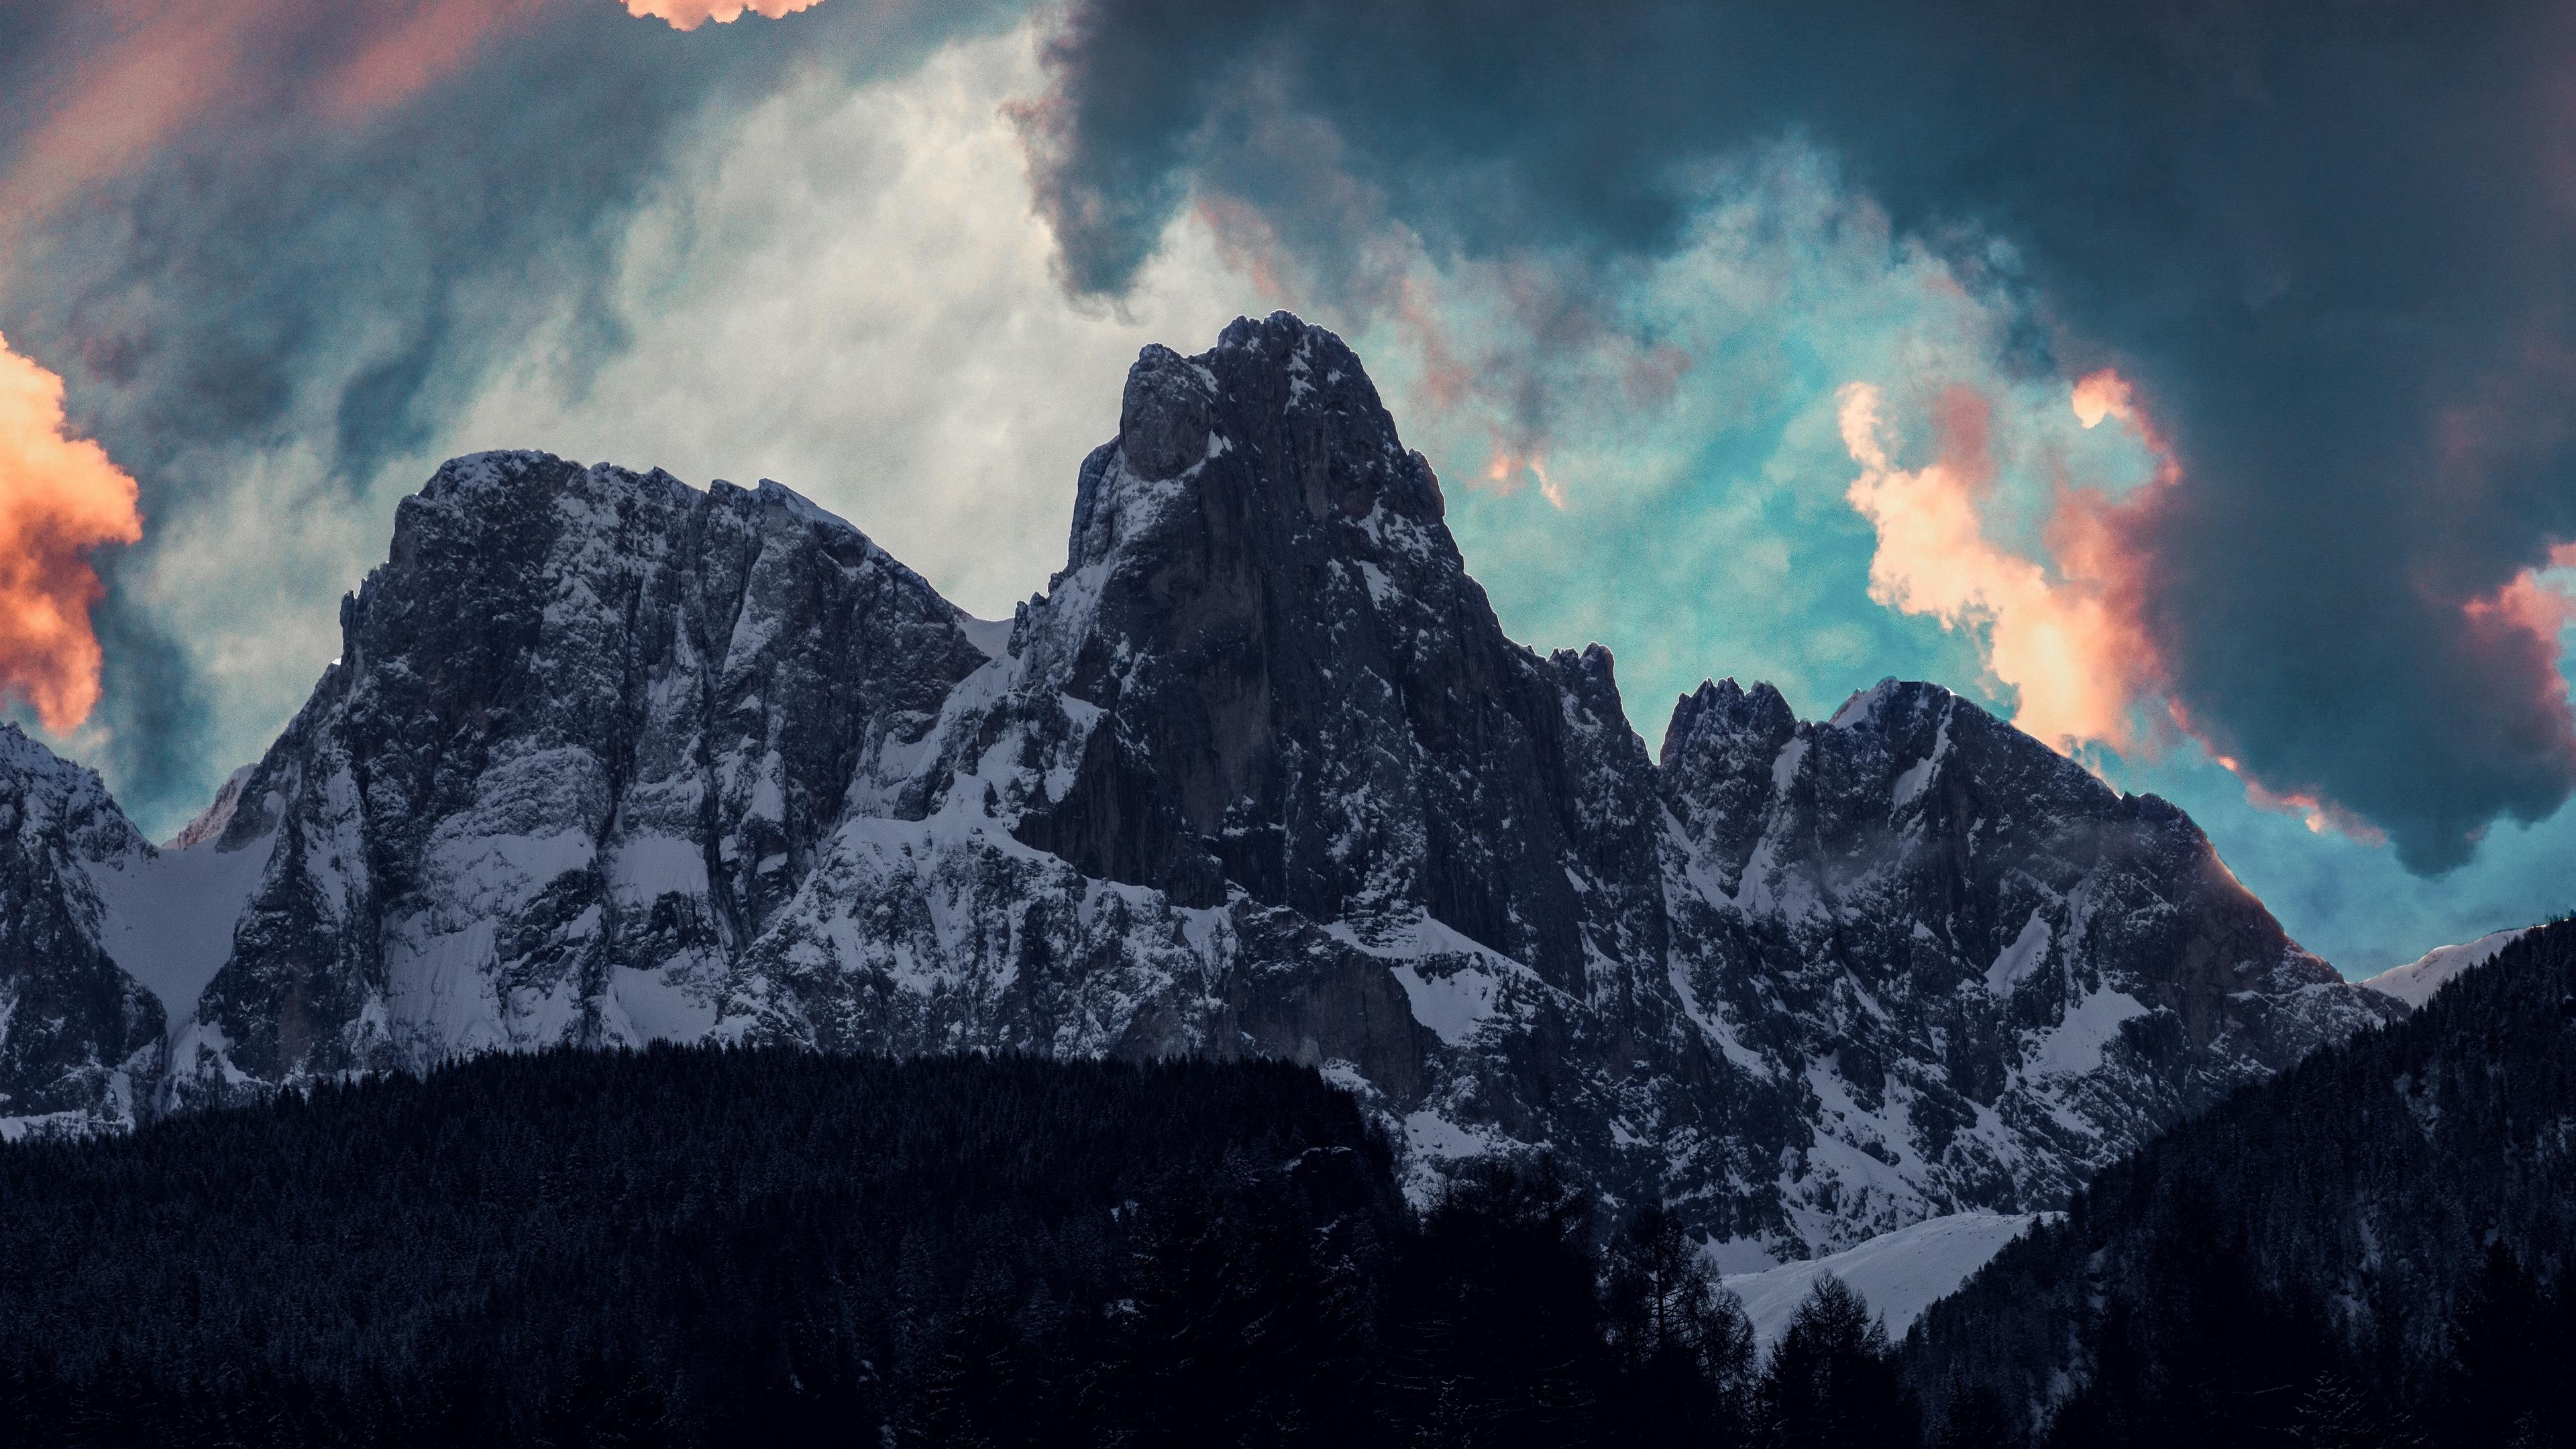 Download wallpaper 3840x2160 mountains, clouds, trees, snow